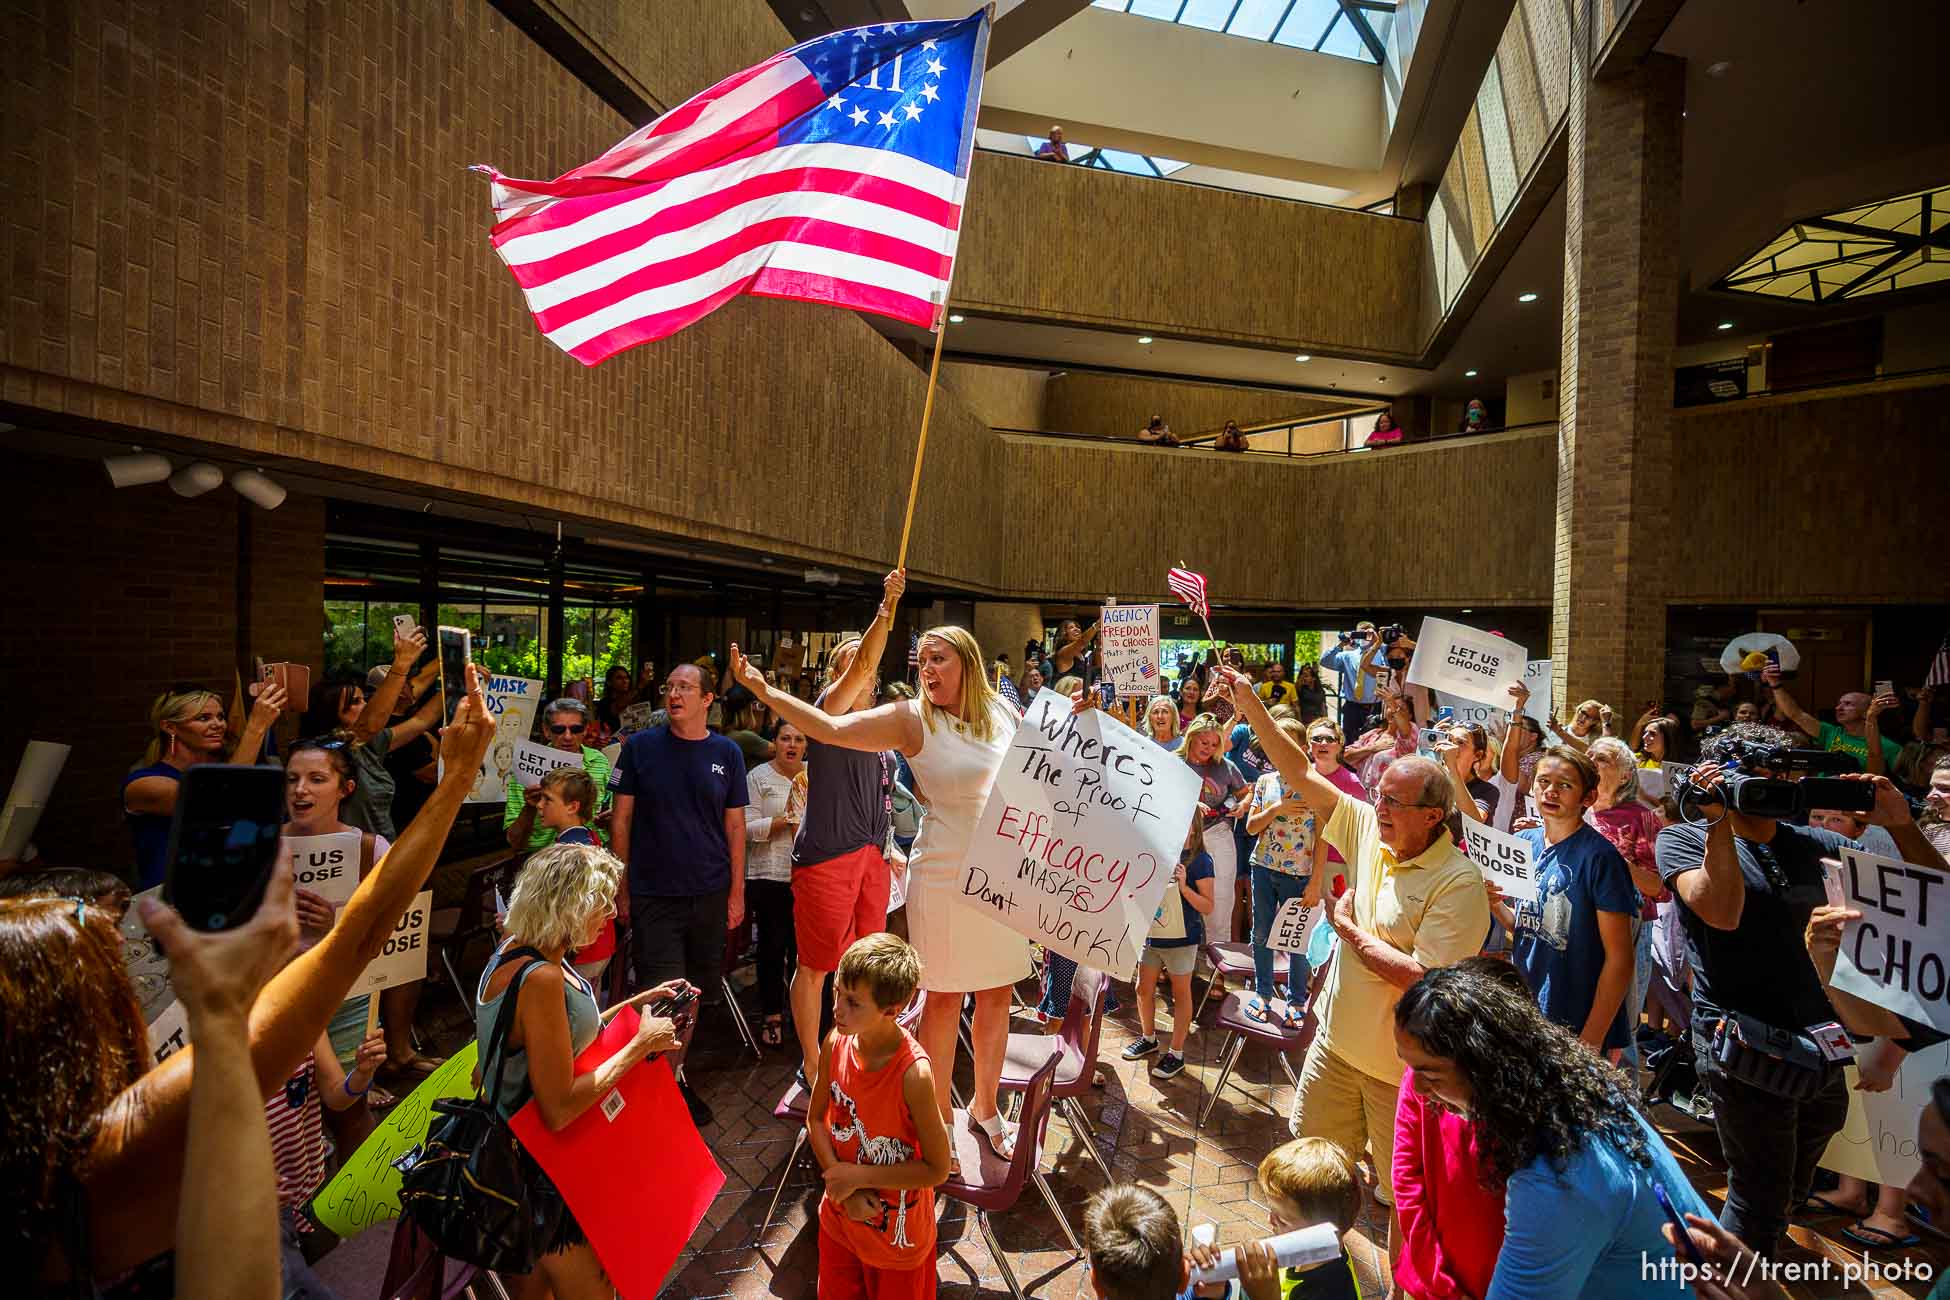 (Trent Nelson  |  The Salt Lake Tribune) People sing the National Anthem under a Three Percenter flag after the Salt Lake County Council voted down Dr. Angela Dunn's mask ordinance for K-6 students, on Thursday, Aug. 12, 2021.